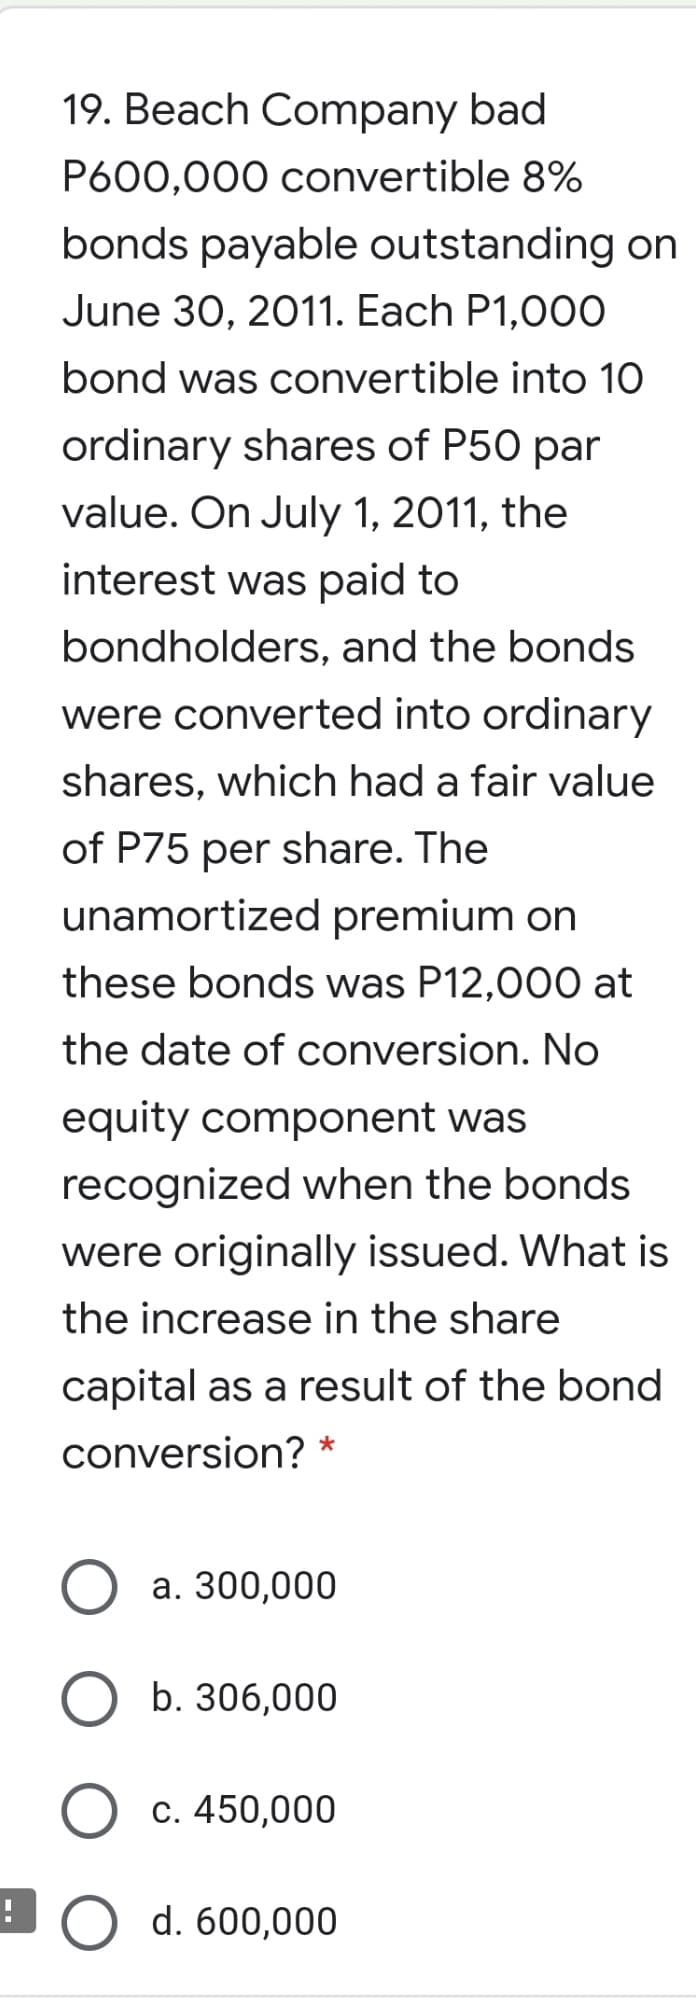 19. Beach Company bad
P600,000 convertible 8%
bonds payable outstanding on
June 30, 2011. Each P1,00O
bond was convertible into 10
ordinary shares of P50 par
value. On July 1, 2011, the
interest was paid to
bondholders, and the bonds
were converted into ordinary
shares, which had a fair value
of P75 per share. The
unamortized premium on
these bonds was P12,000 at
the date of conversion. No
equity component was
recognized when the bonds
were originally issued. What is
the increase in the share
capital as a result of the bond
conversion? *
a. 300,000
b. 306,000
c. 450,000
d. 600,000
